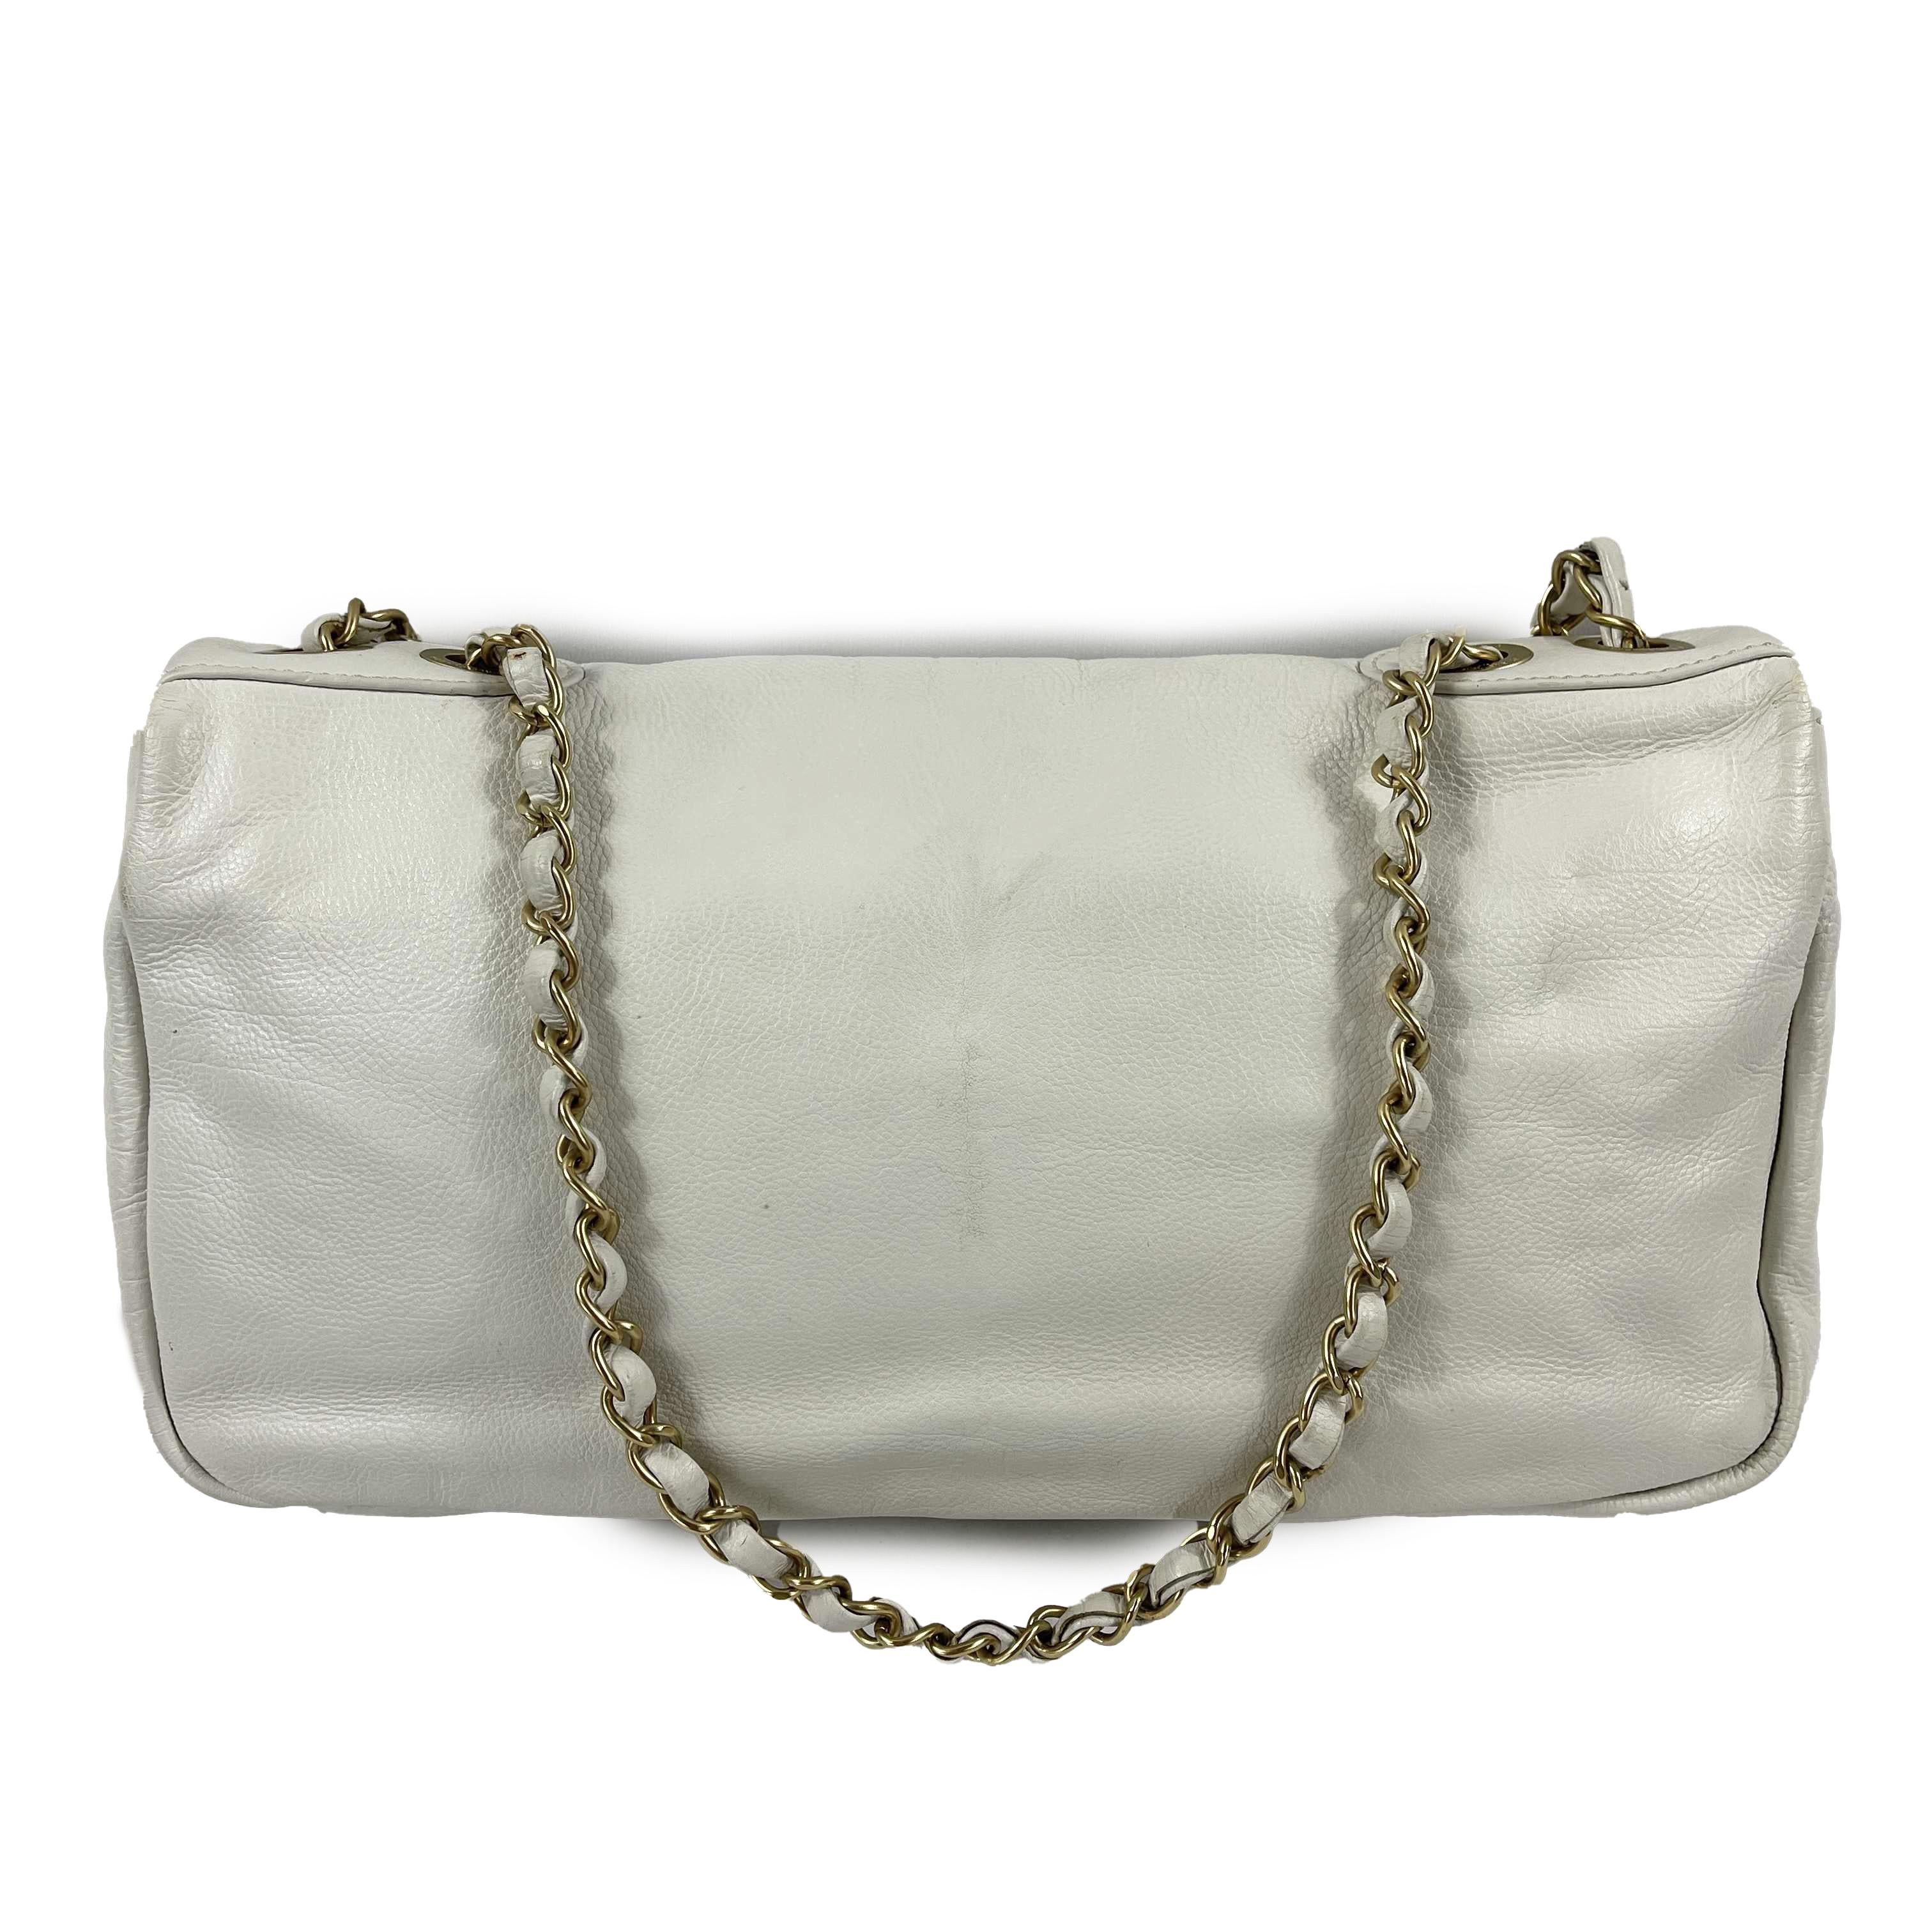 CHANEL - Mosaic Metal East West Maxi Calfskin Flap White Shoulder / Crossbody

Description

2009 Cruise Collection.
CC logo on front flap features a mosaic metal detail in silver, gold and pewter.
Matte gold hardware.
Soft construction in calfskin